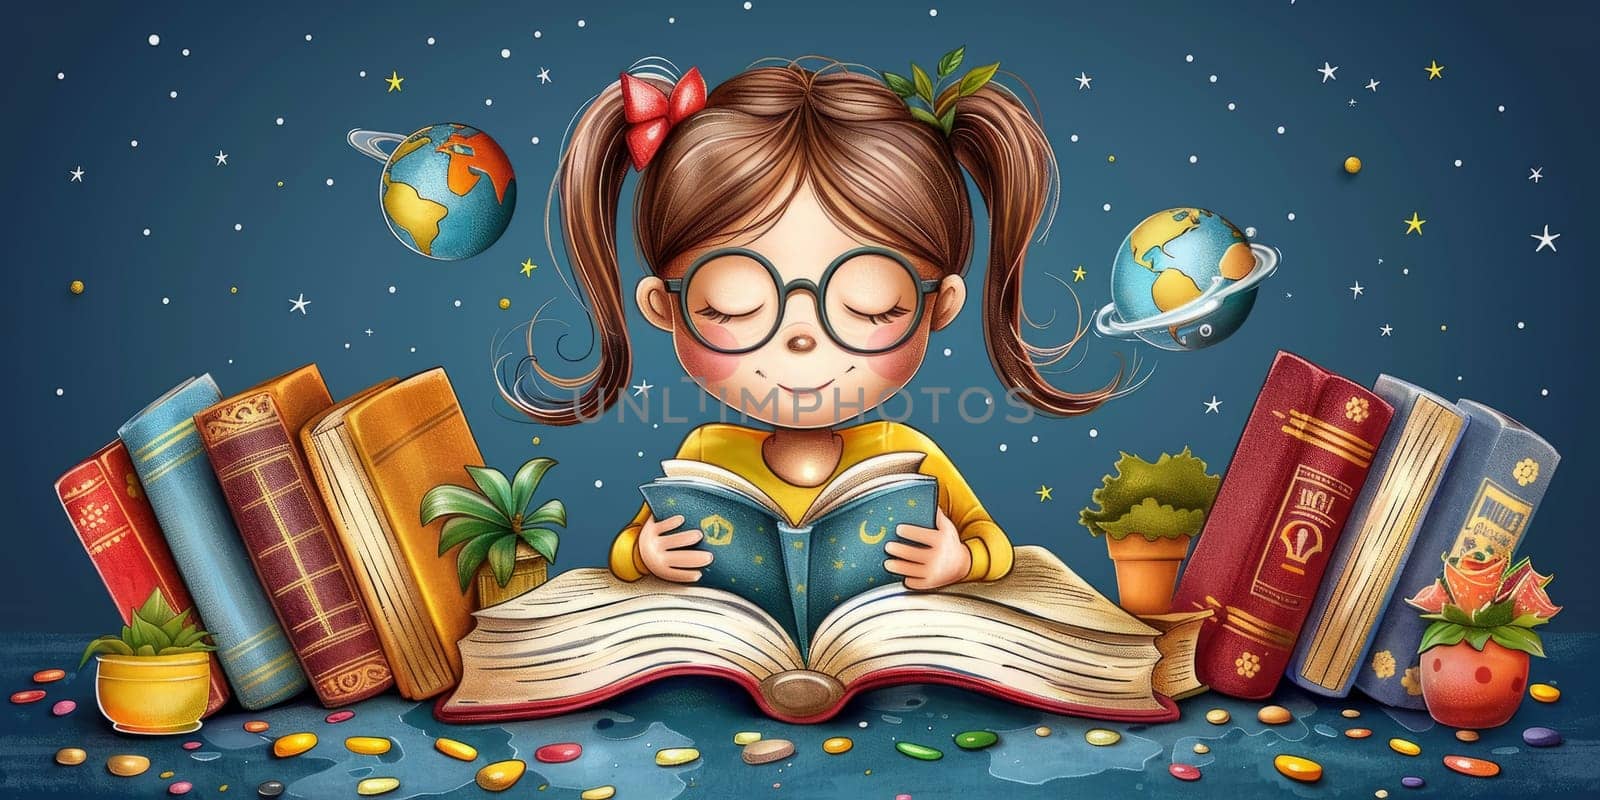 Imaginative Girl Reading Book with Magical World Emerging from Pages. Concept of Childhood Reading, Imagination, and Love for Literature. by ailike